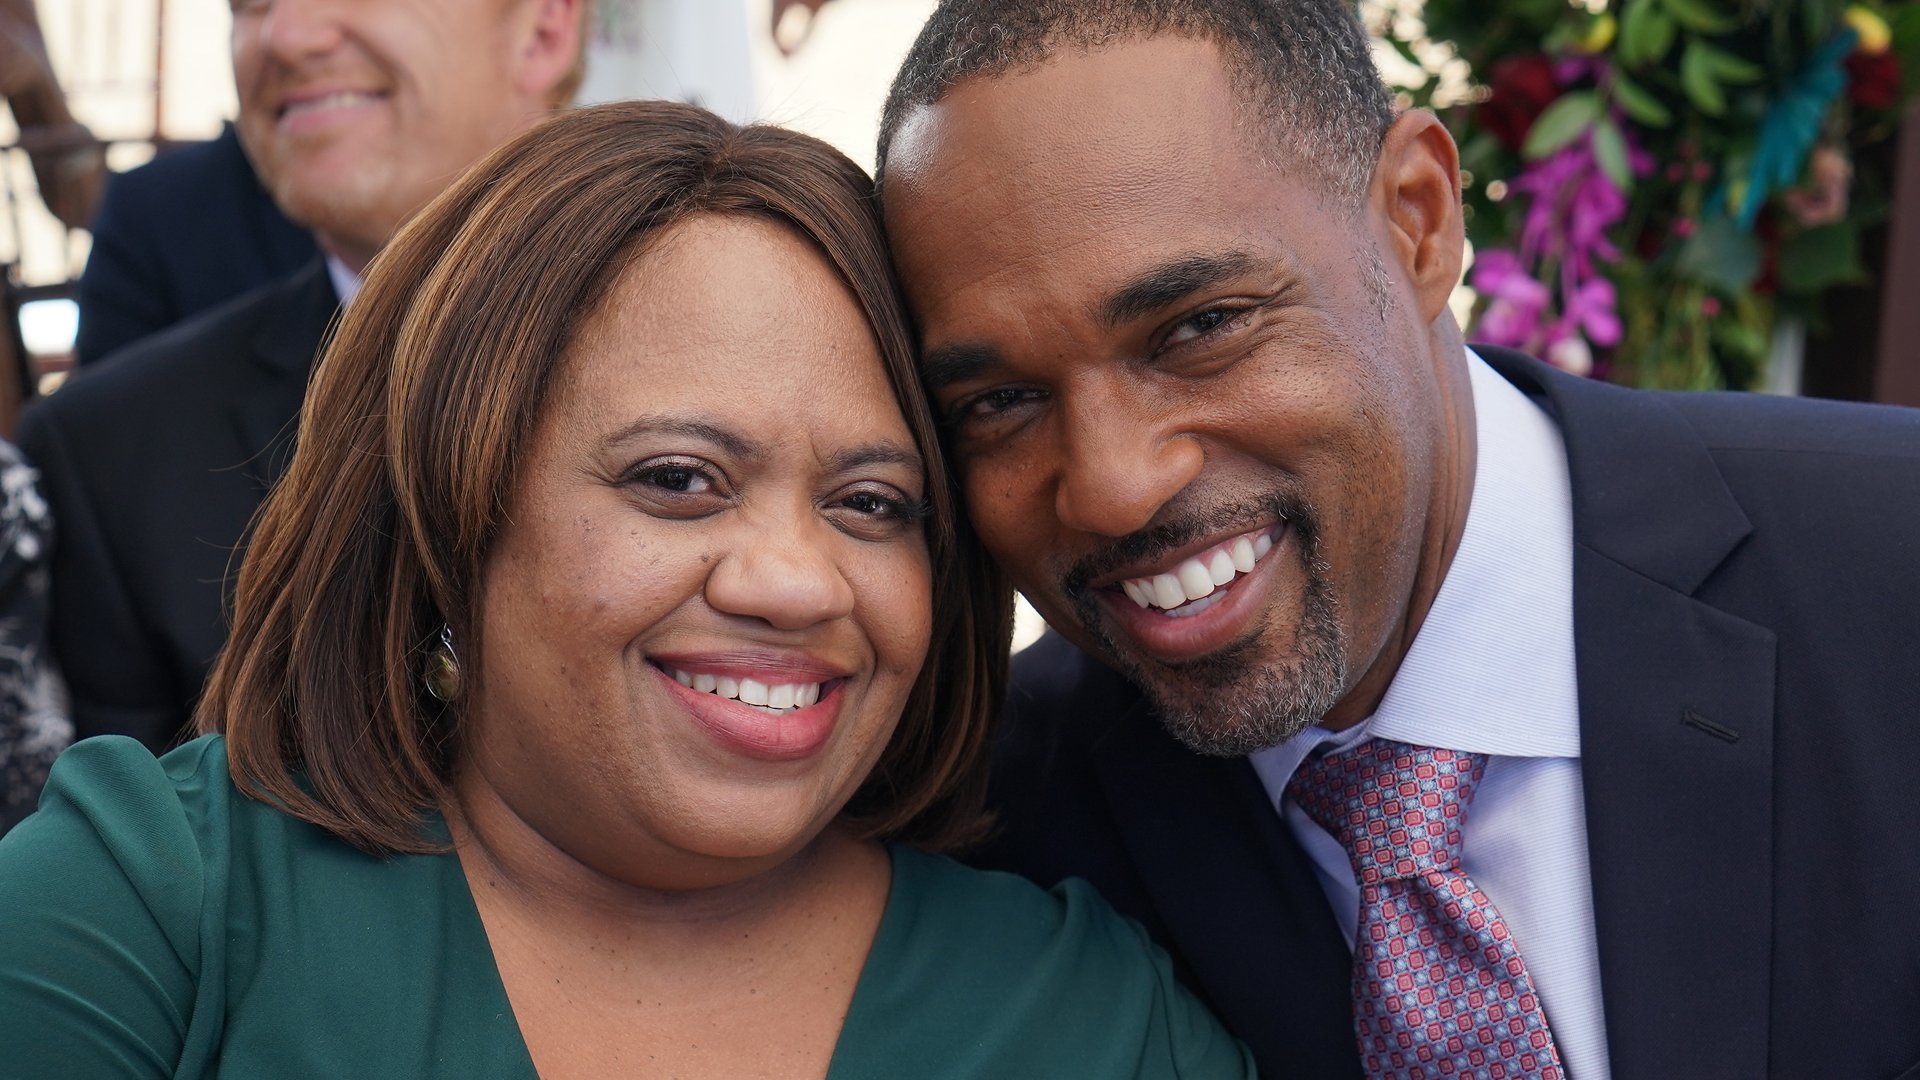 ‘Grey’s Anatomy’ and ‘Station 19’ stars Chandra Wilson and Jason George as Miranda Bailey and Ben Warren during Maggie and Winston’s wedding